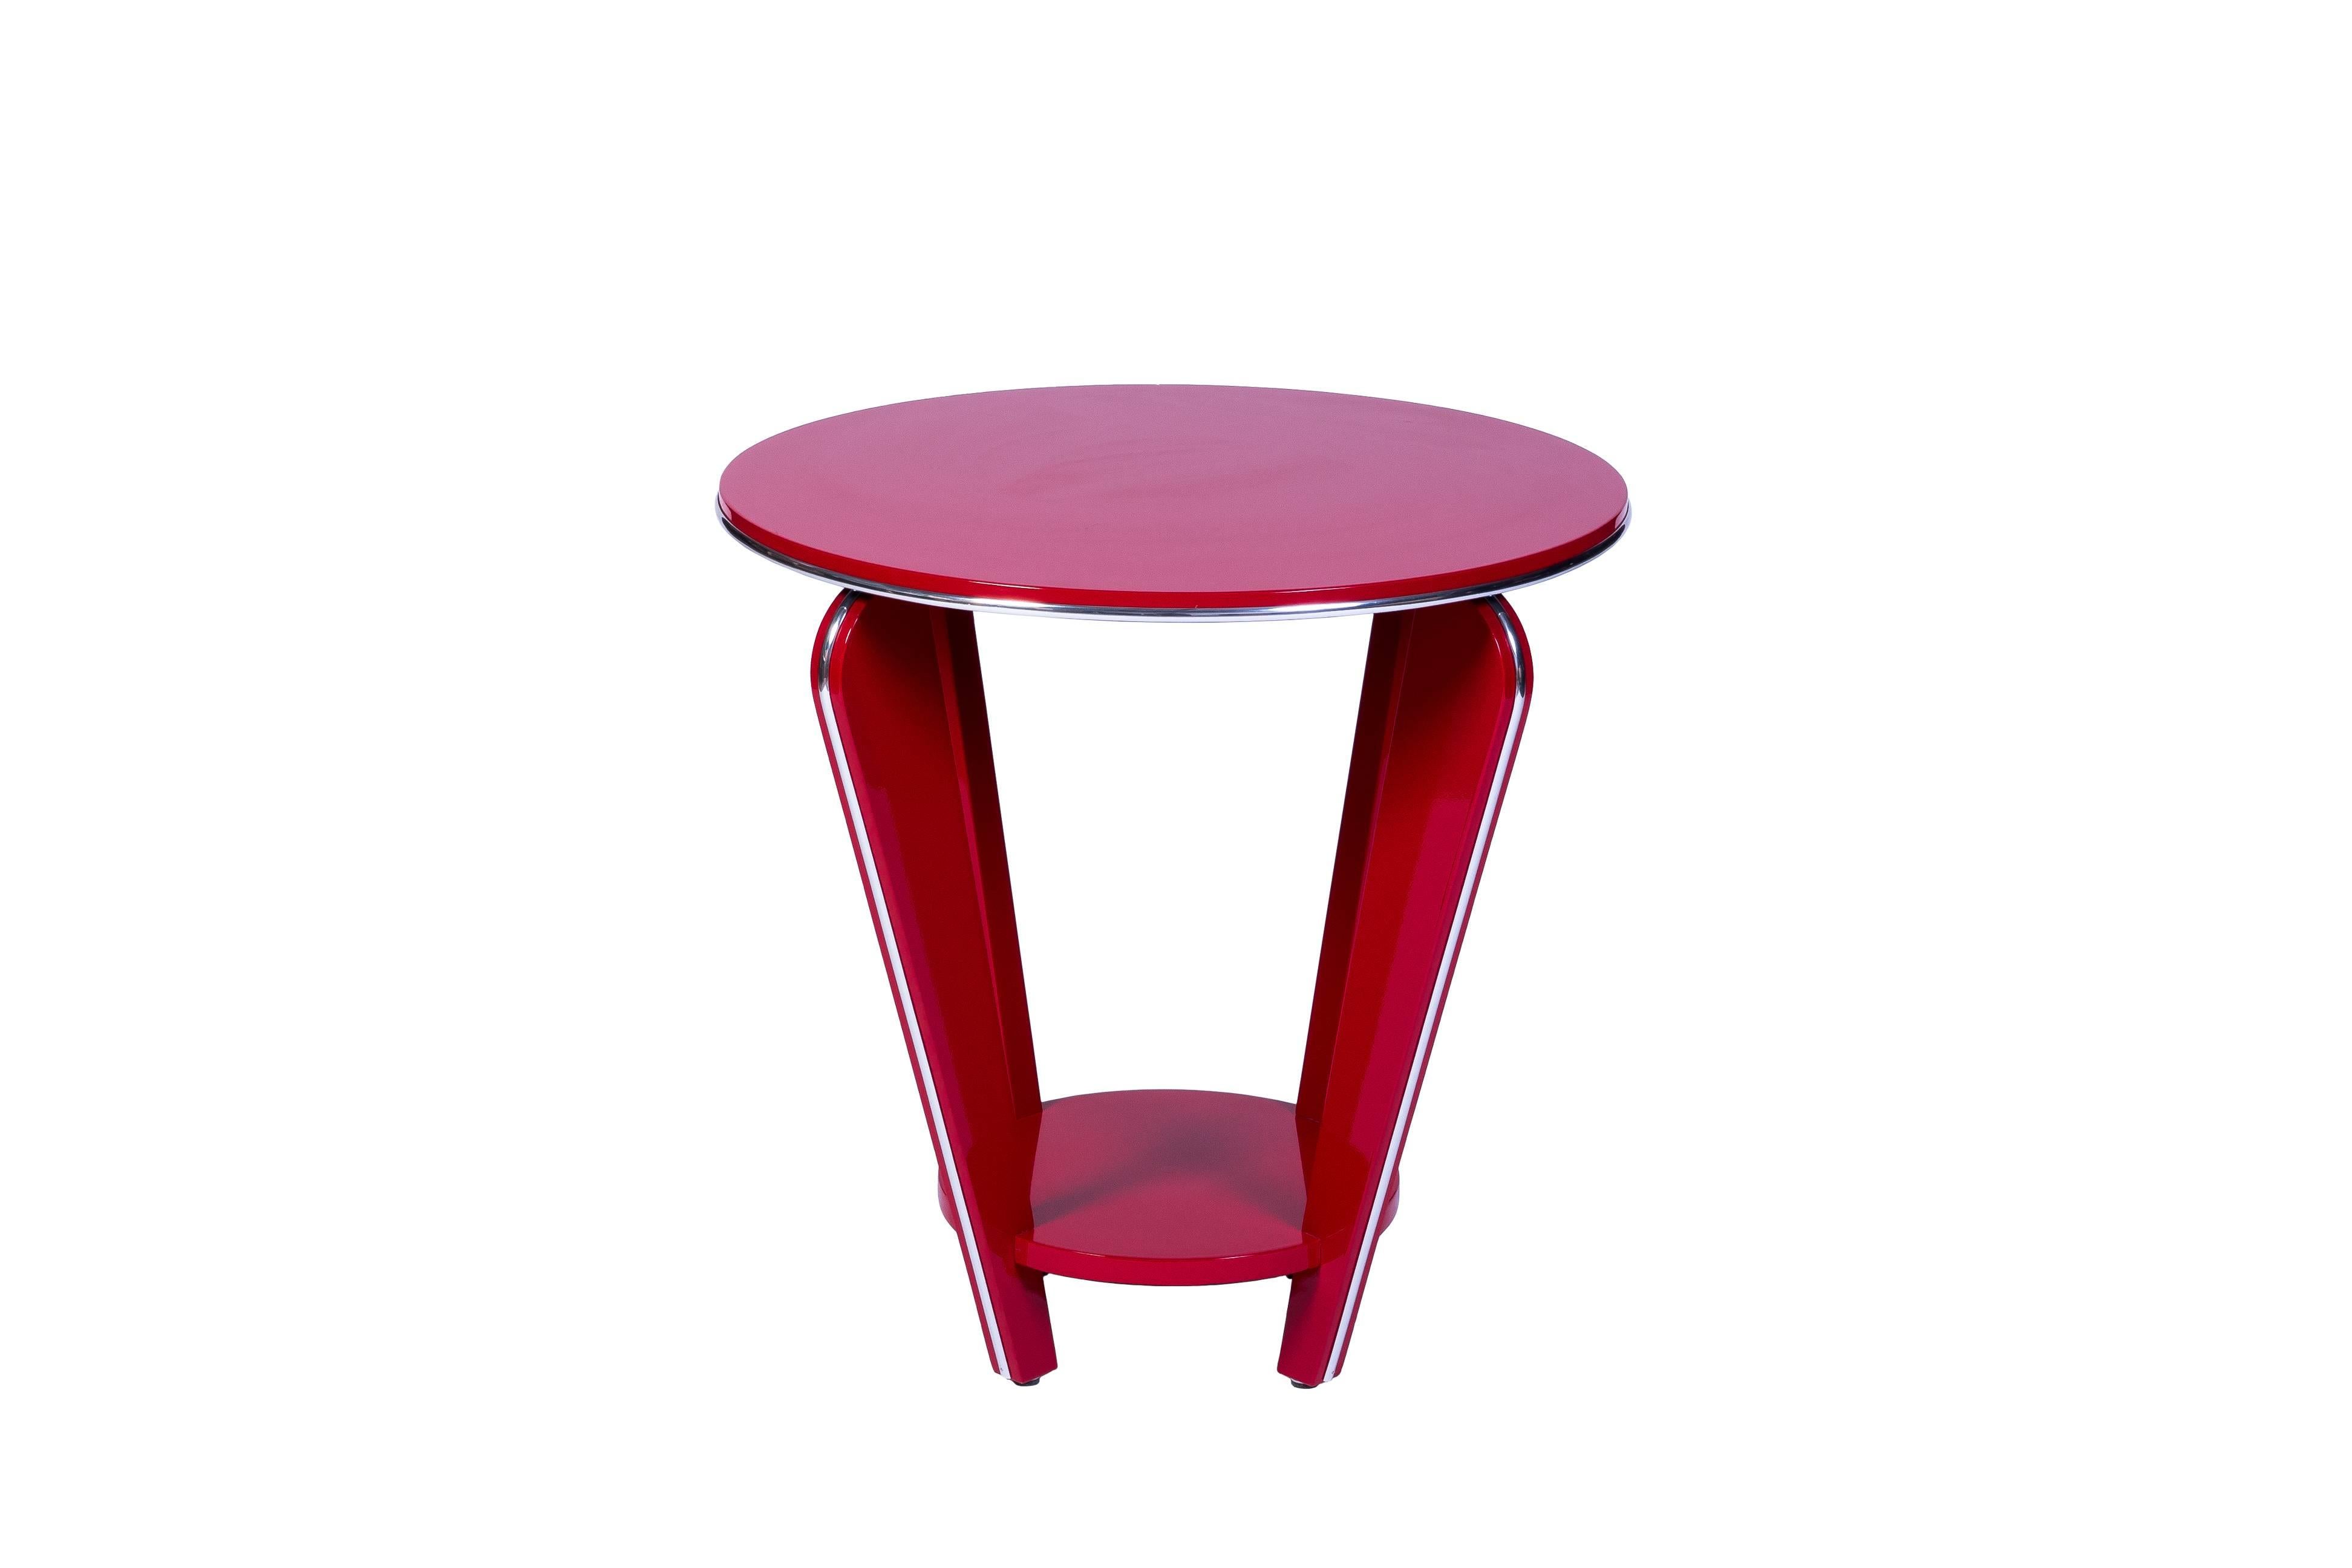 This beautiful Art Deco end or side table features a conical design with curved legs, chrome detailing and a beautiful high gloss crimson lacquer finish.